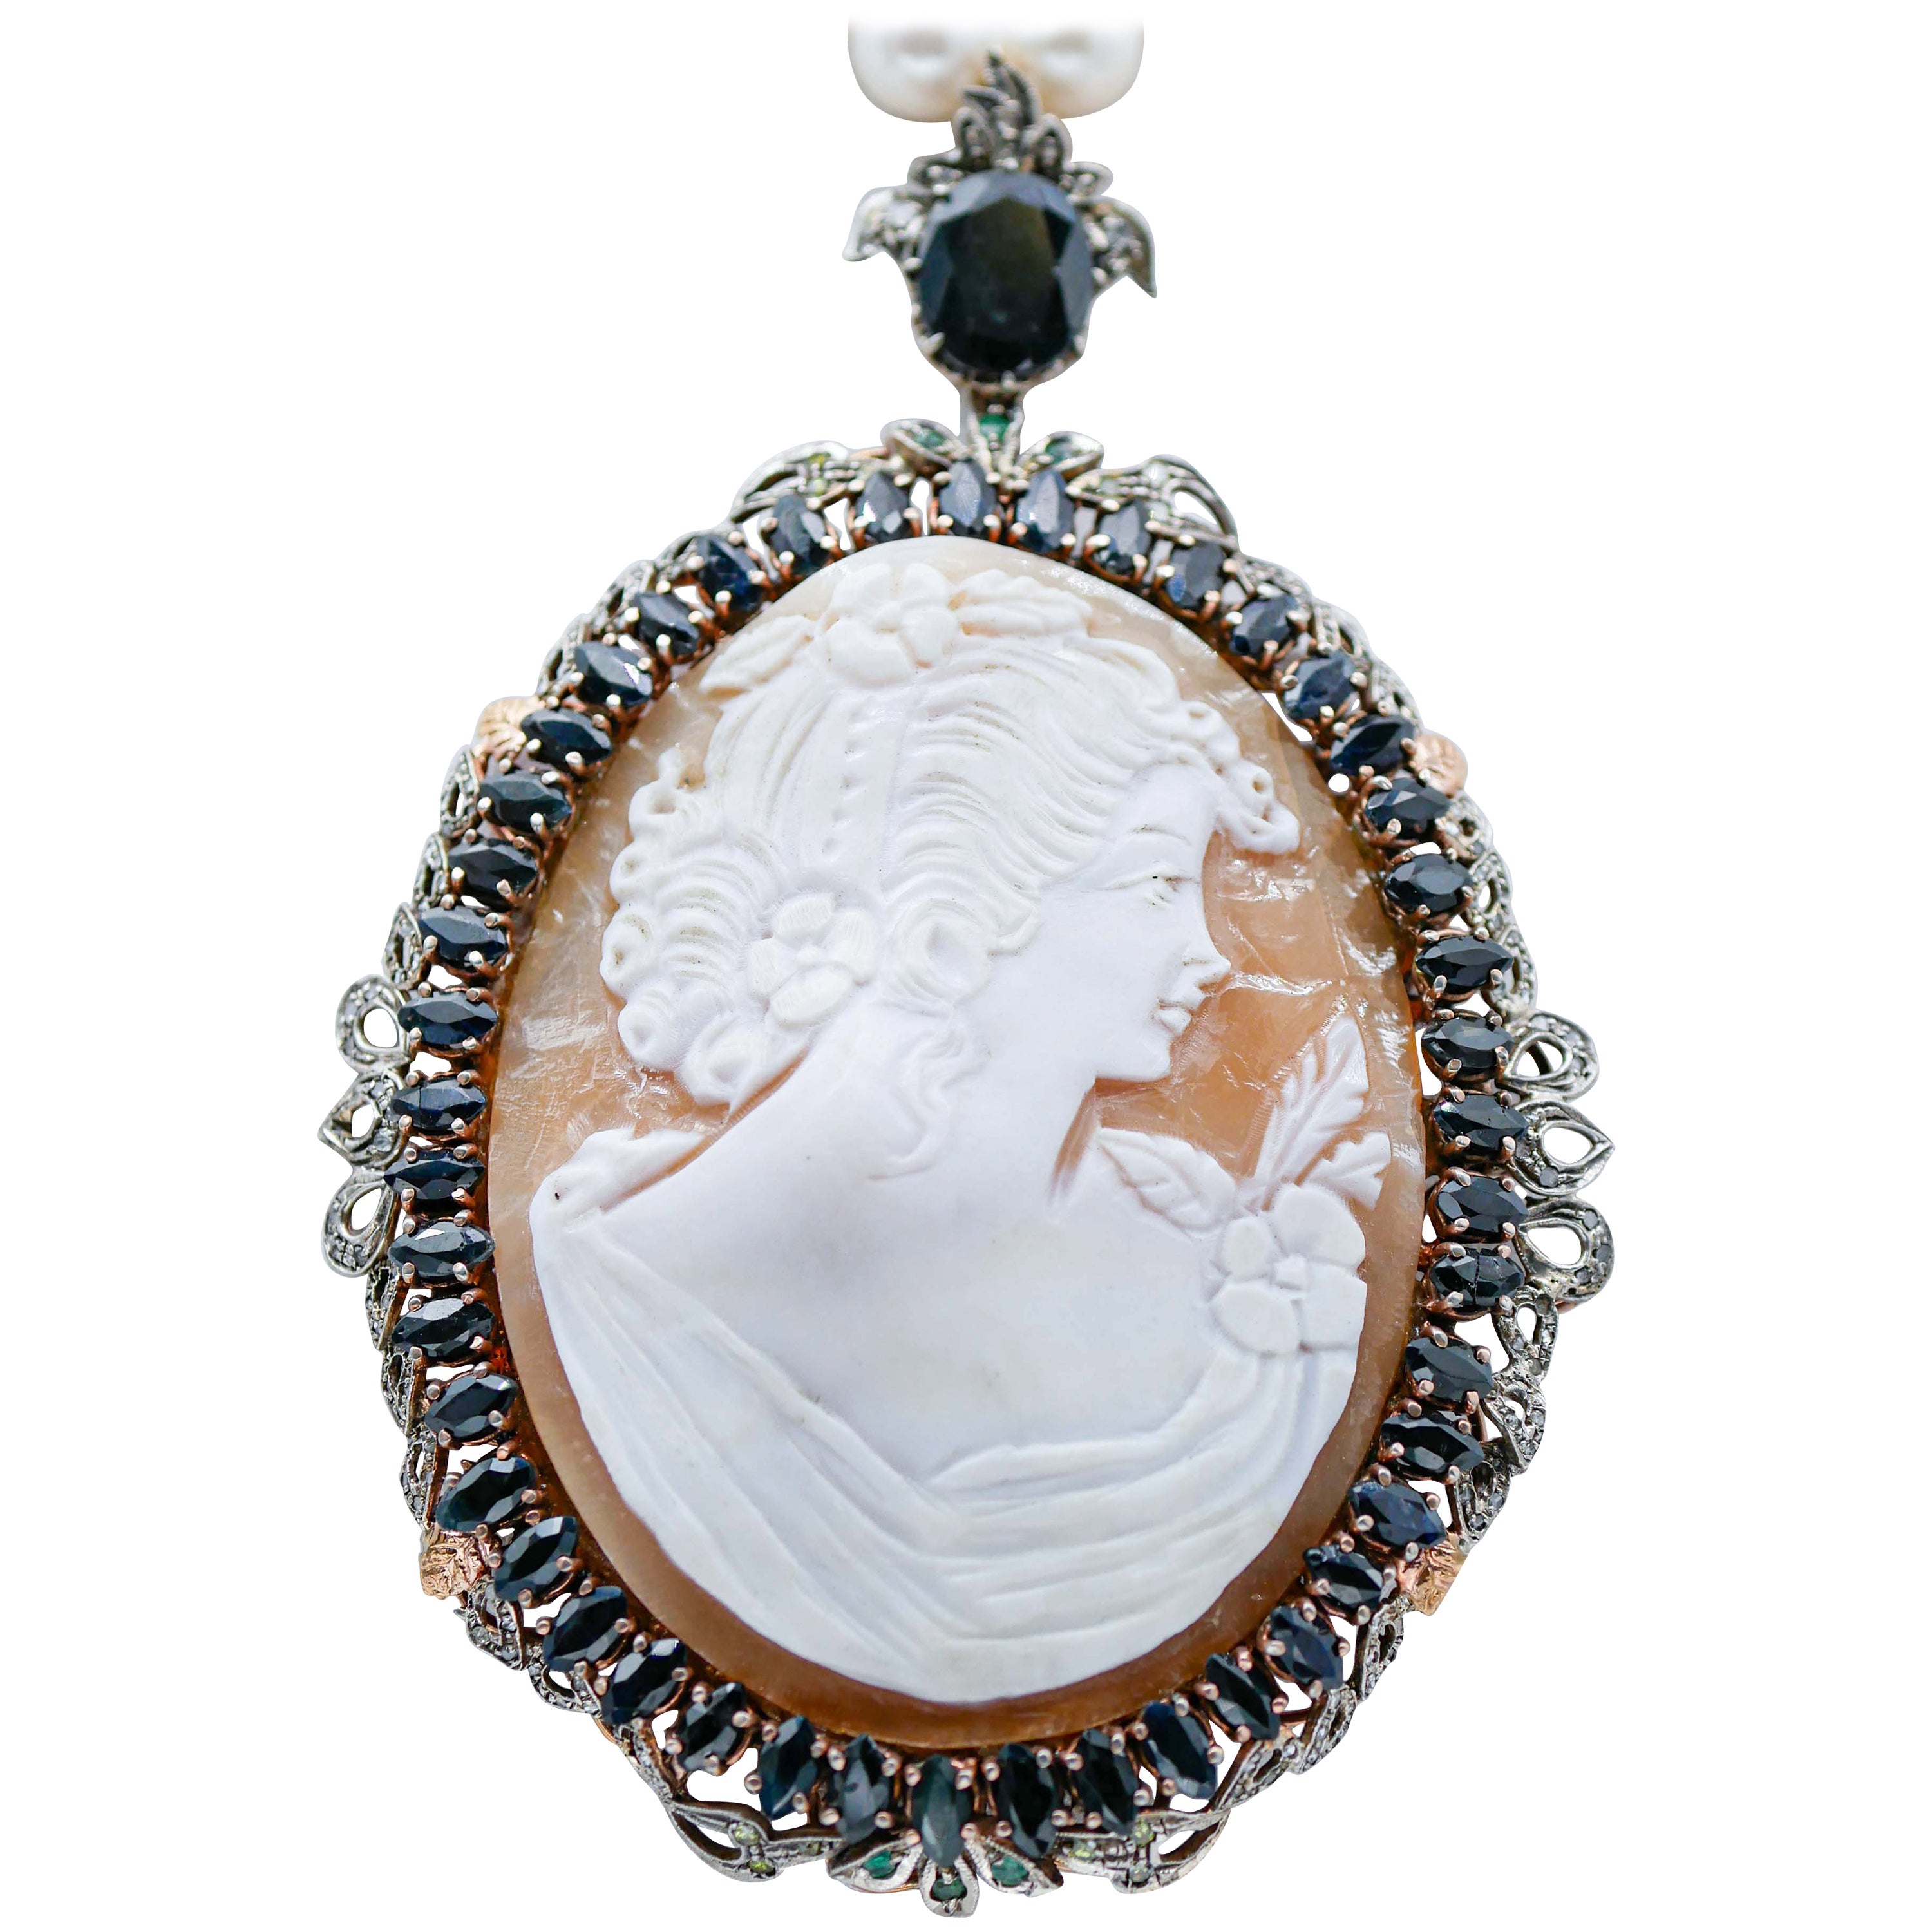 Cameo, Sapphires, Emeralds, Diamonds, Pearls, Rose Gold and Silver Necklace For Sale